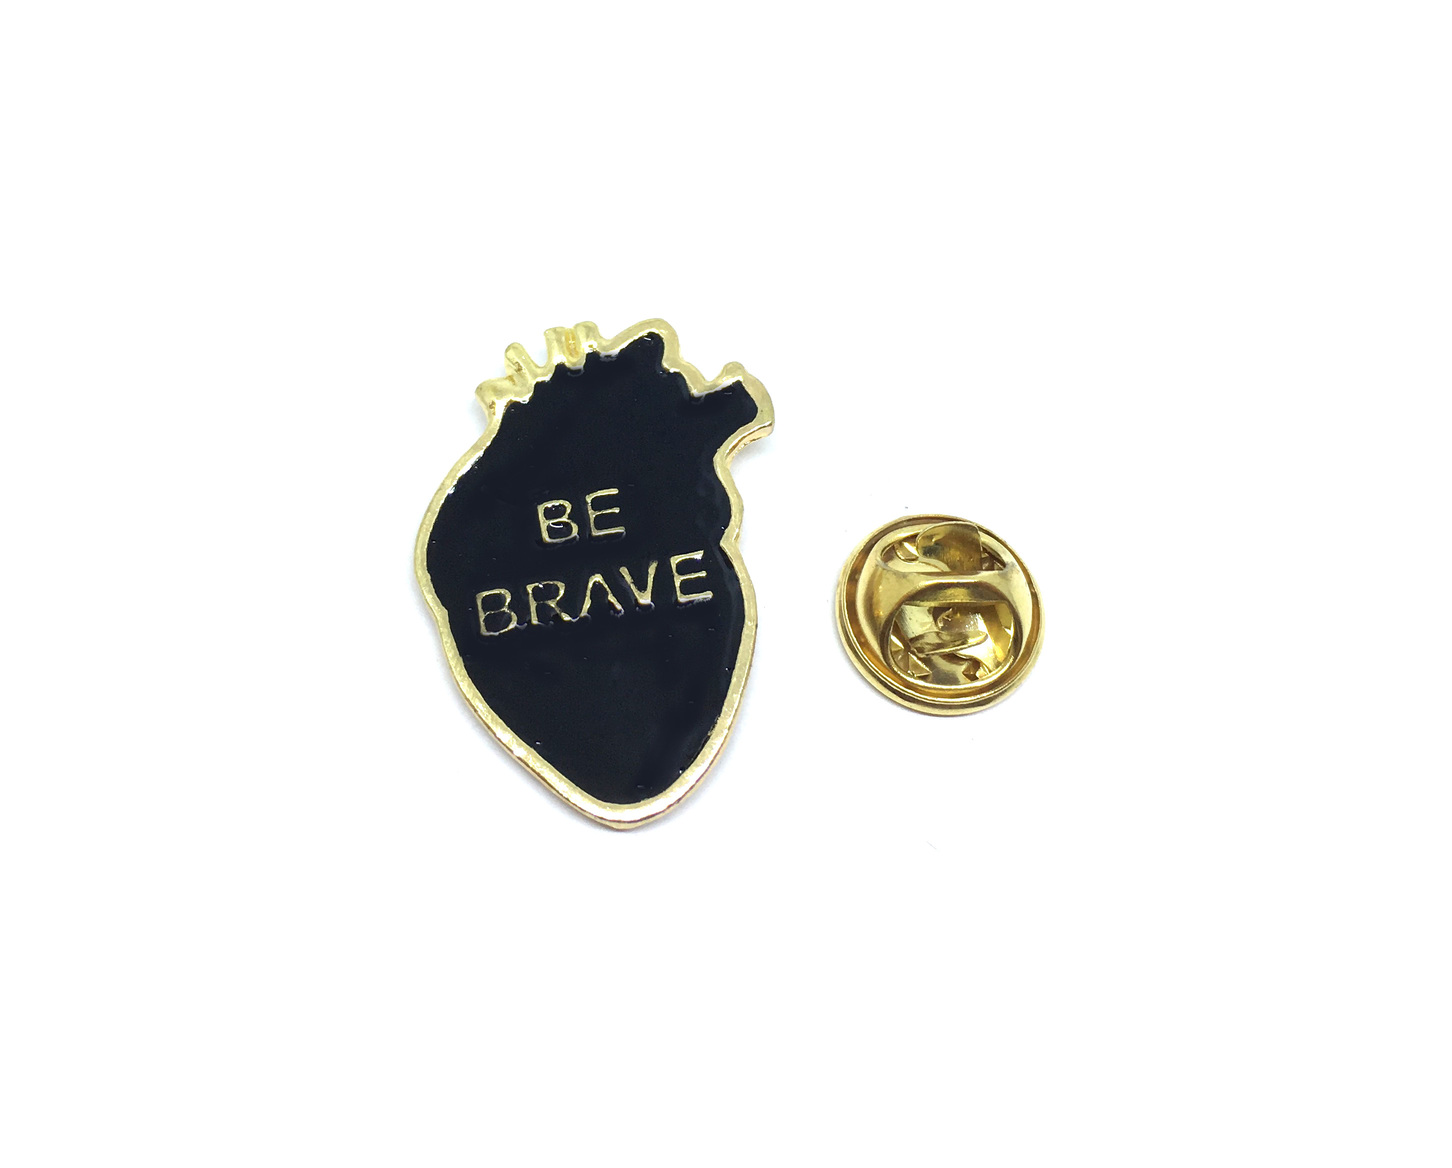 BE BRAVE Pin